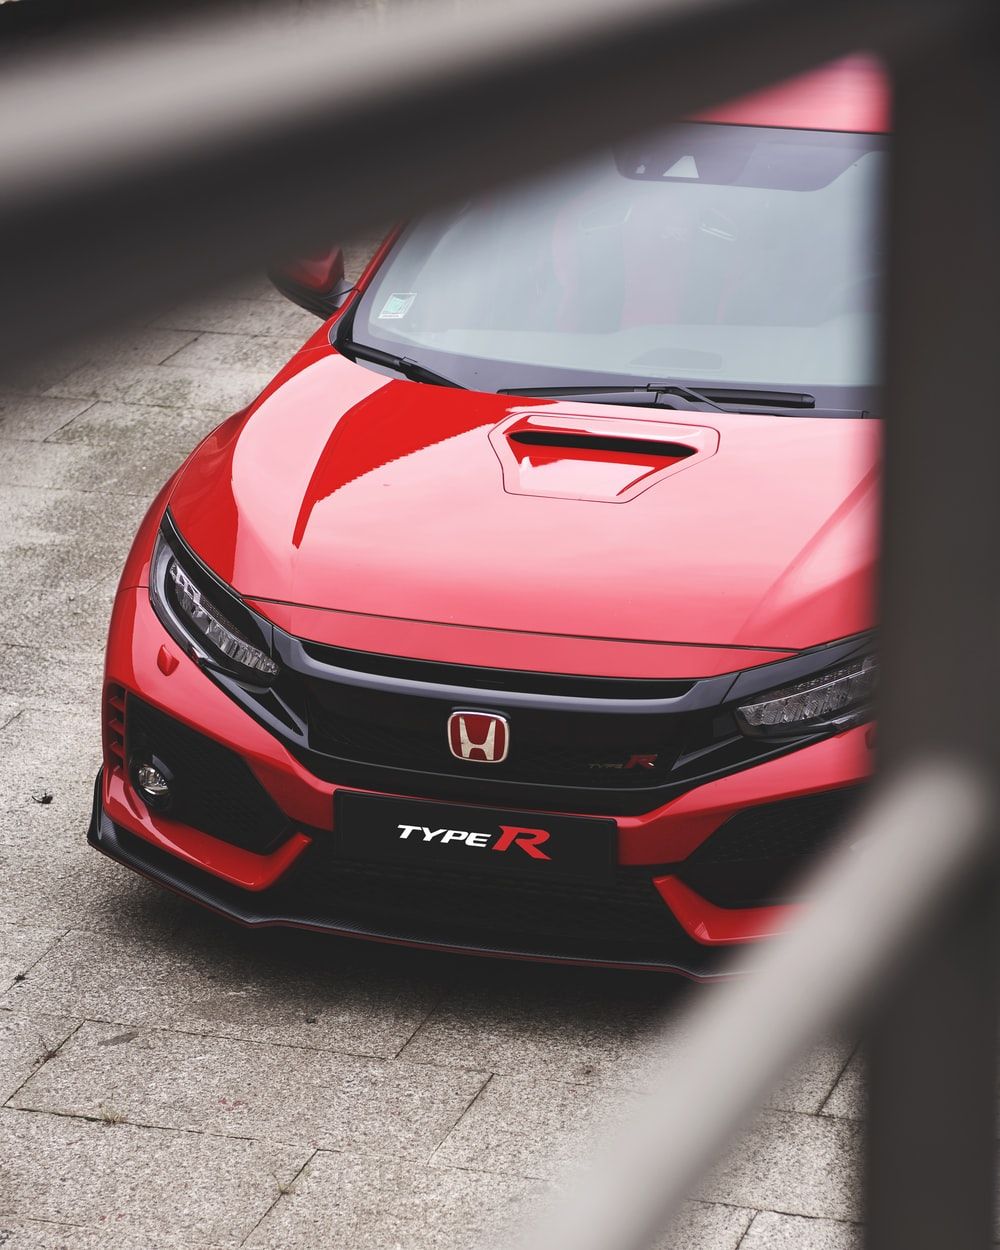 Civic Type R Picture. Download Free Image